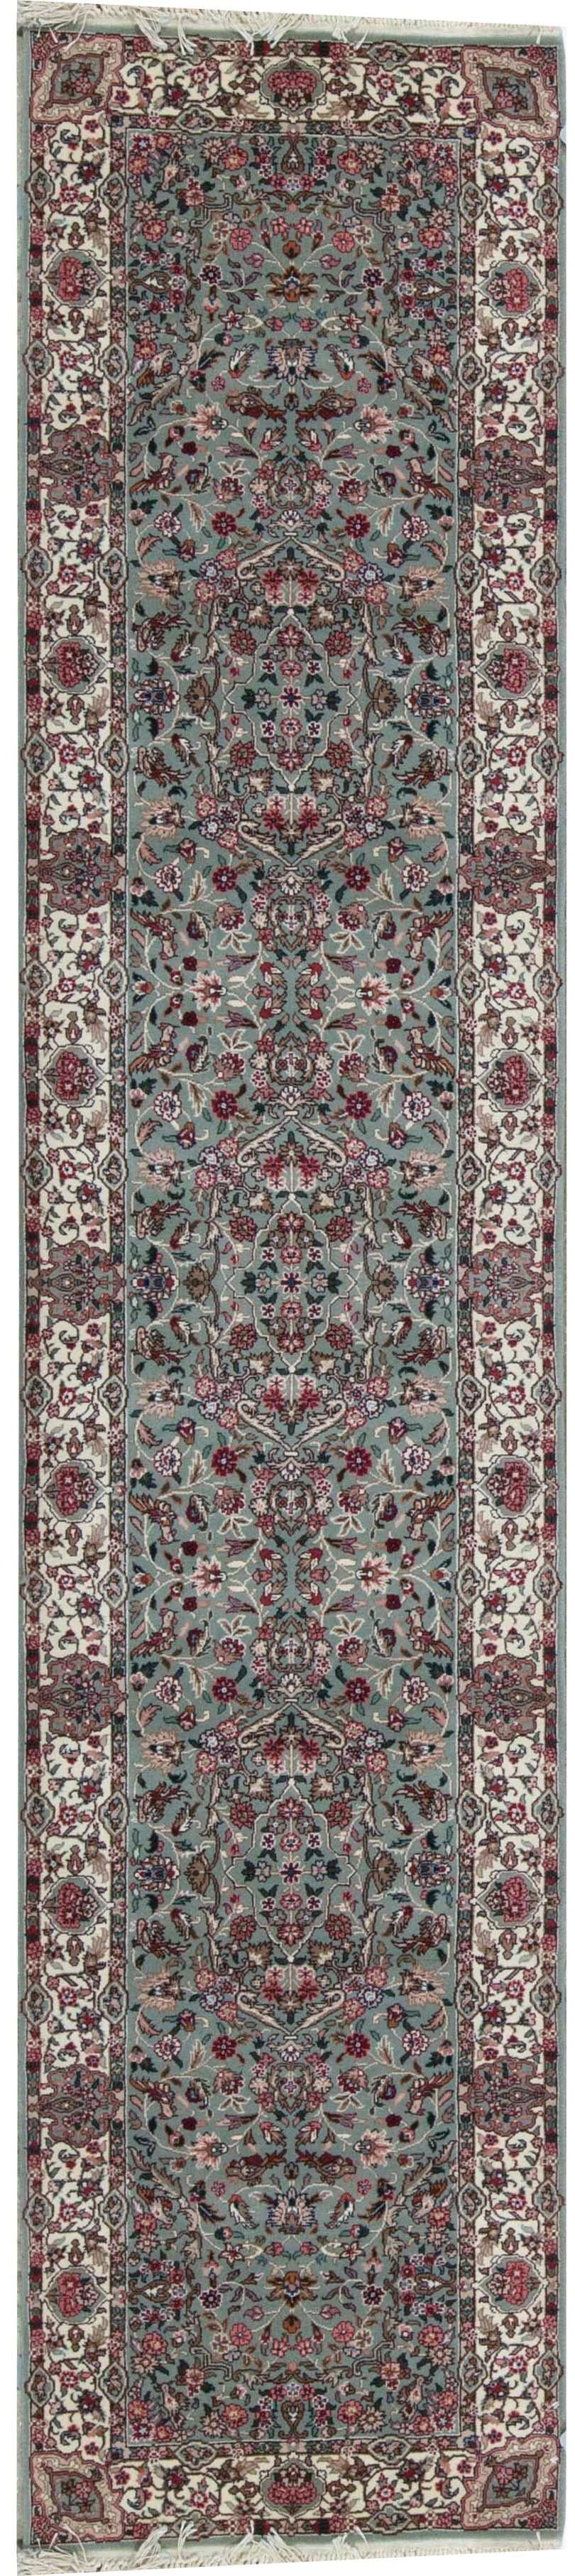 Contemporary One of a Kind Traditional Handwoven Wool Area Runner  2'6 x 12' For Sale